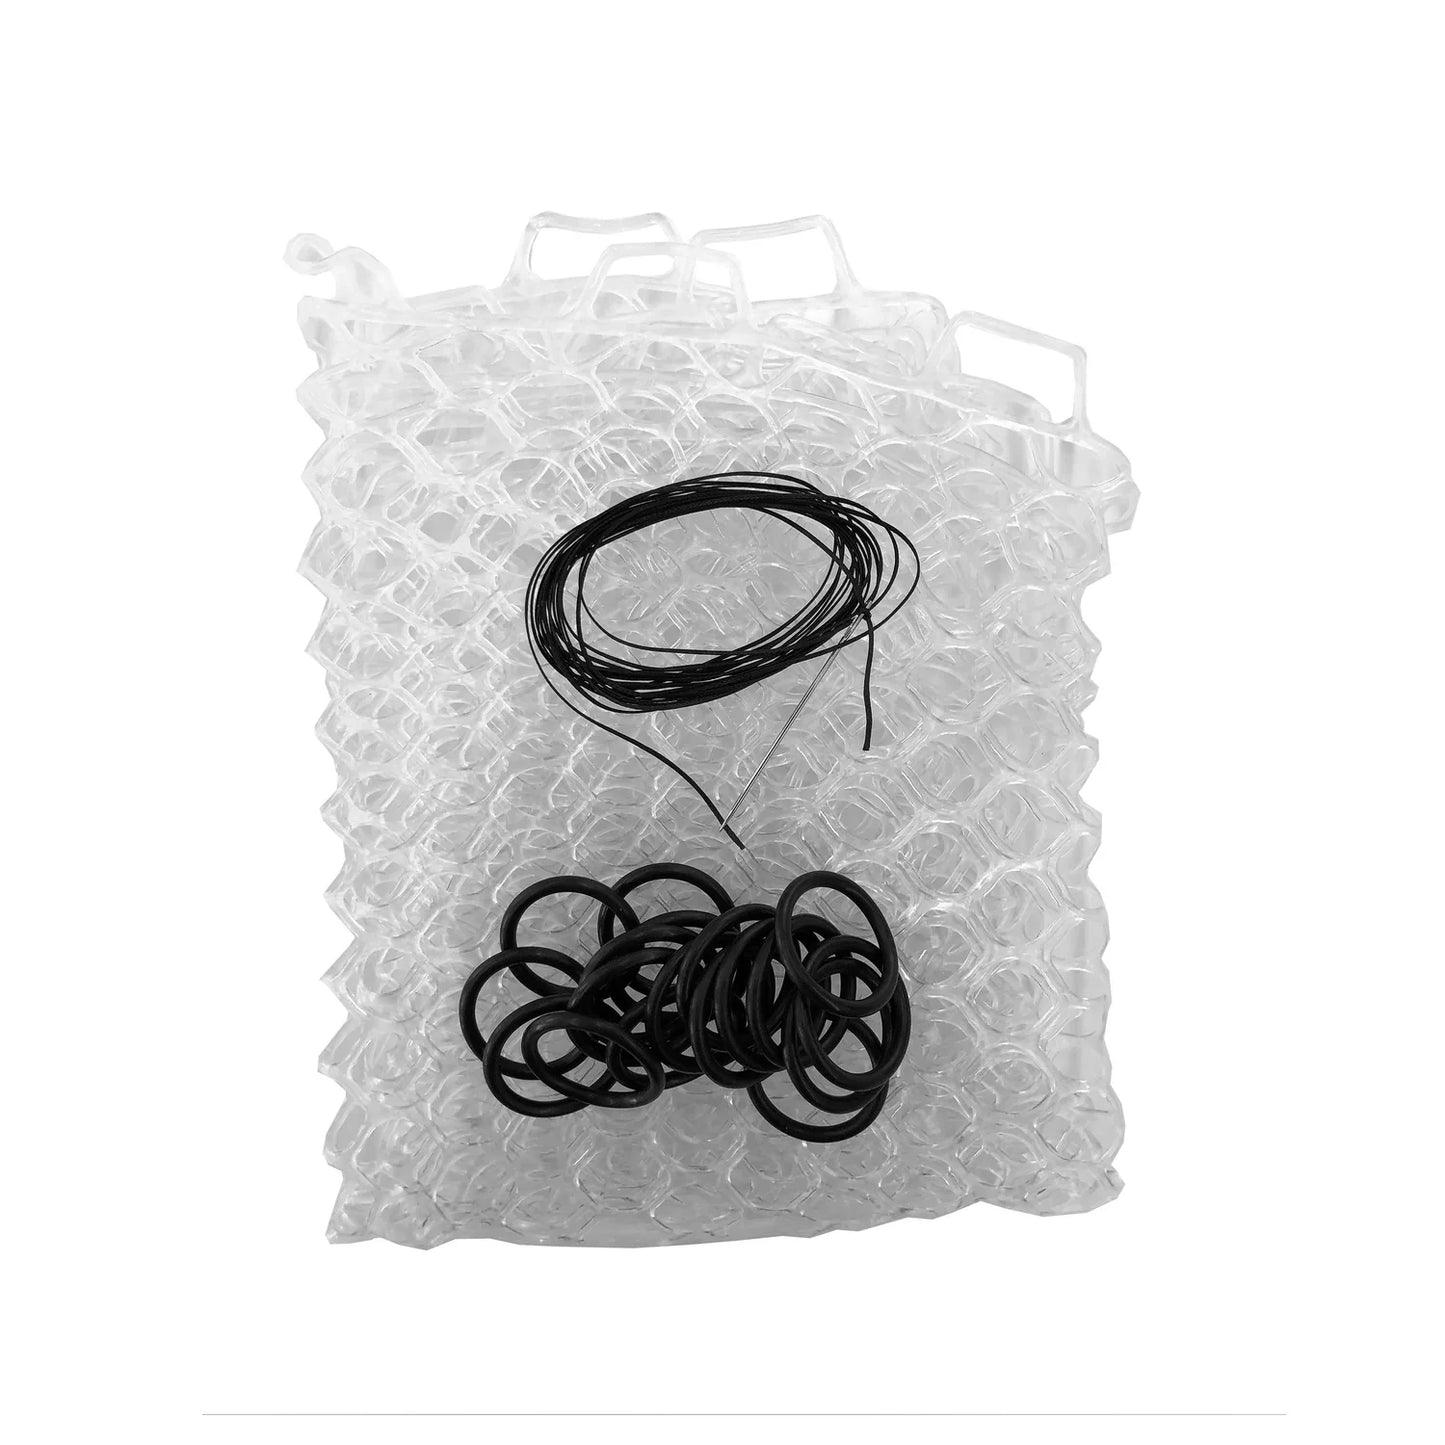 Fishpond 19" Nomad Replacement Rubber Net - Large Clear